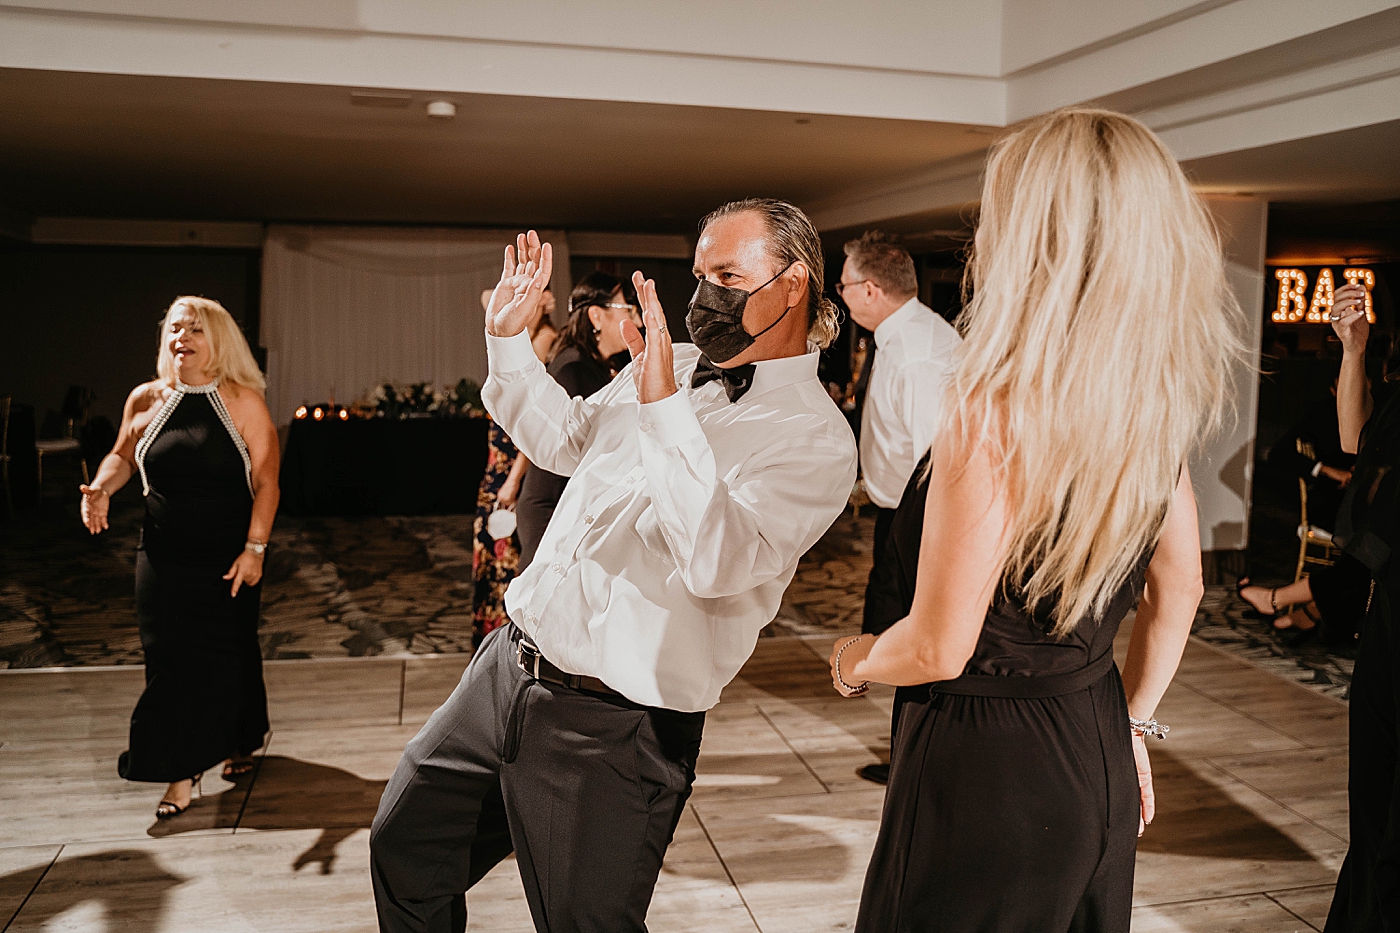 Candid mask on dancing Waterstone Resort and Marina Wedding captured by South Florida Wedding Photographer Krystal Capone Photography